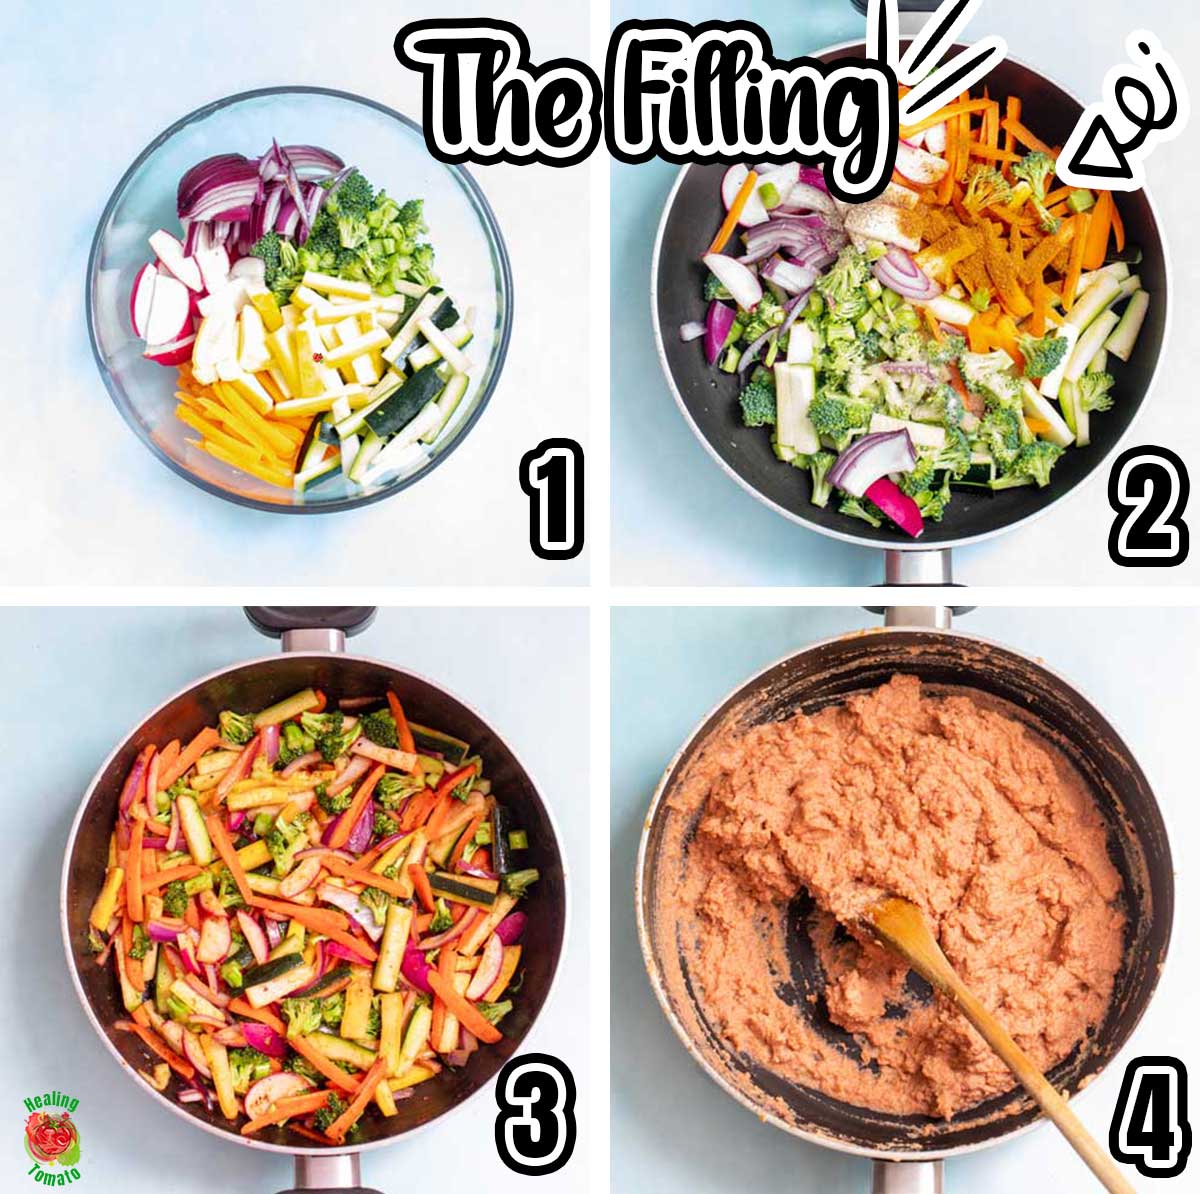 Top view of a collage of 4 images that show how to make the filling for vegetarian enchilada